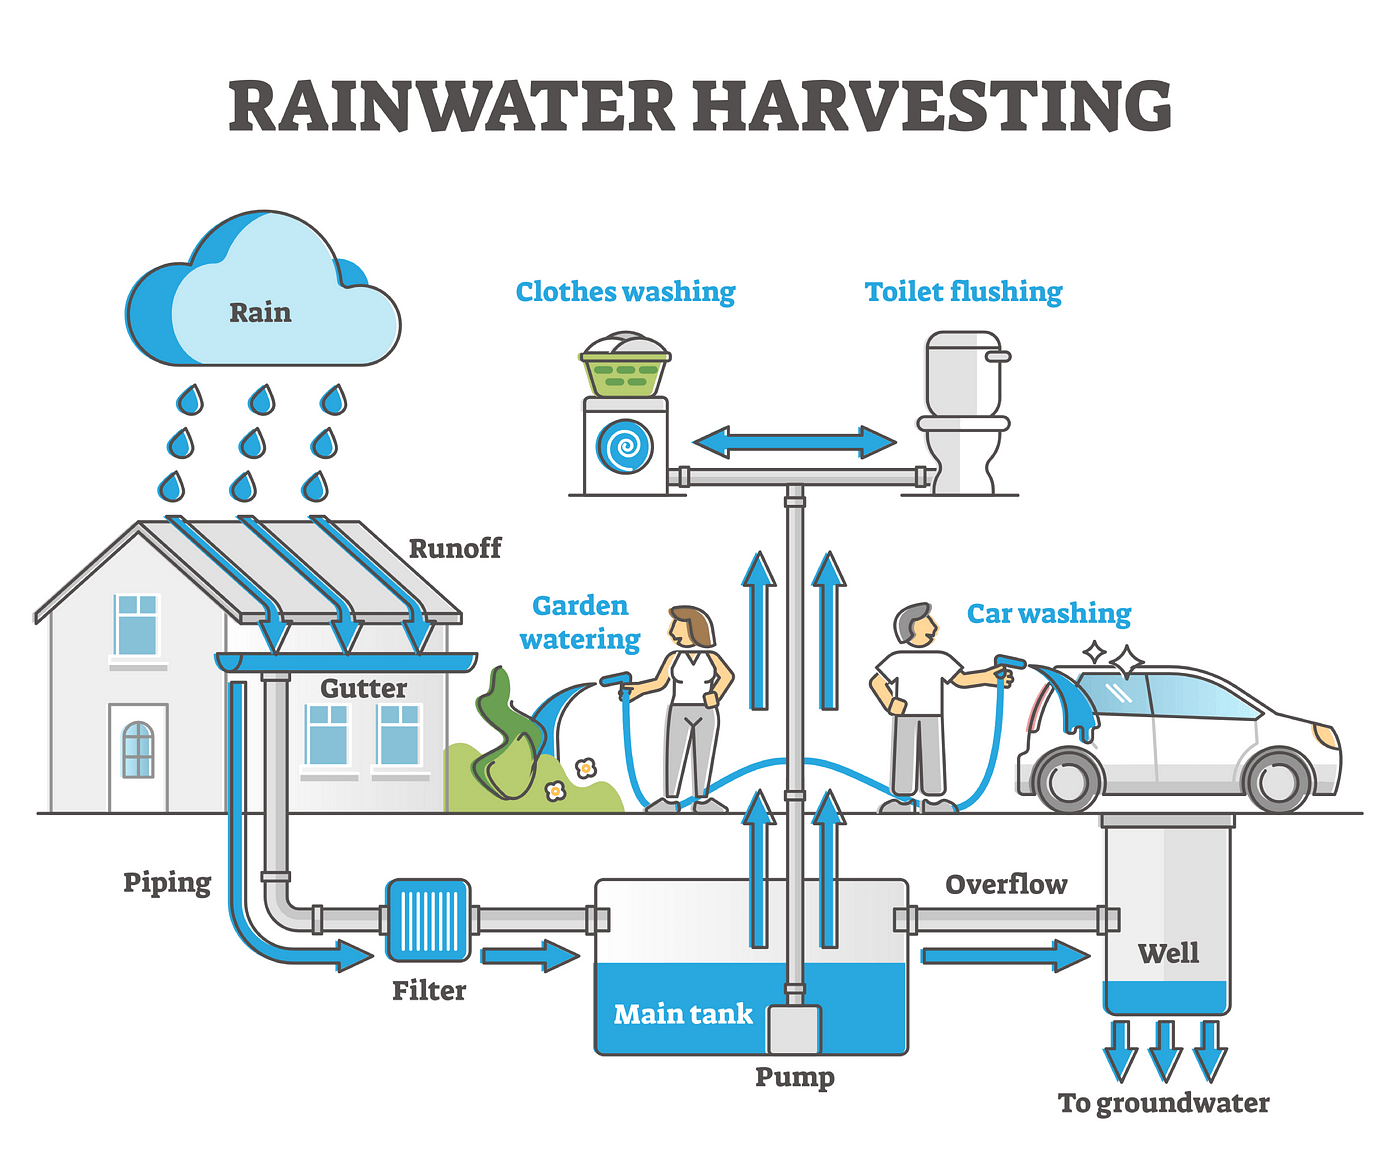 Rainwater Harvesting: A Sustainable Solution for Water Conservation